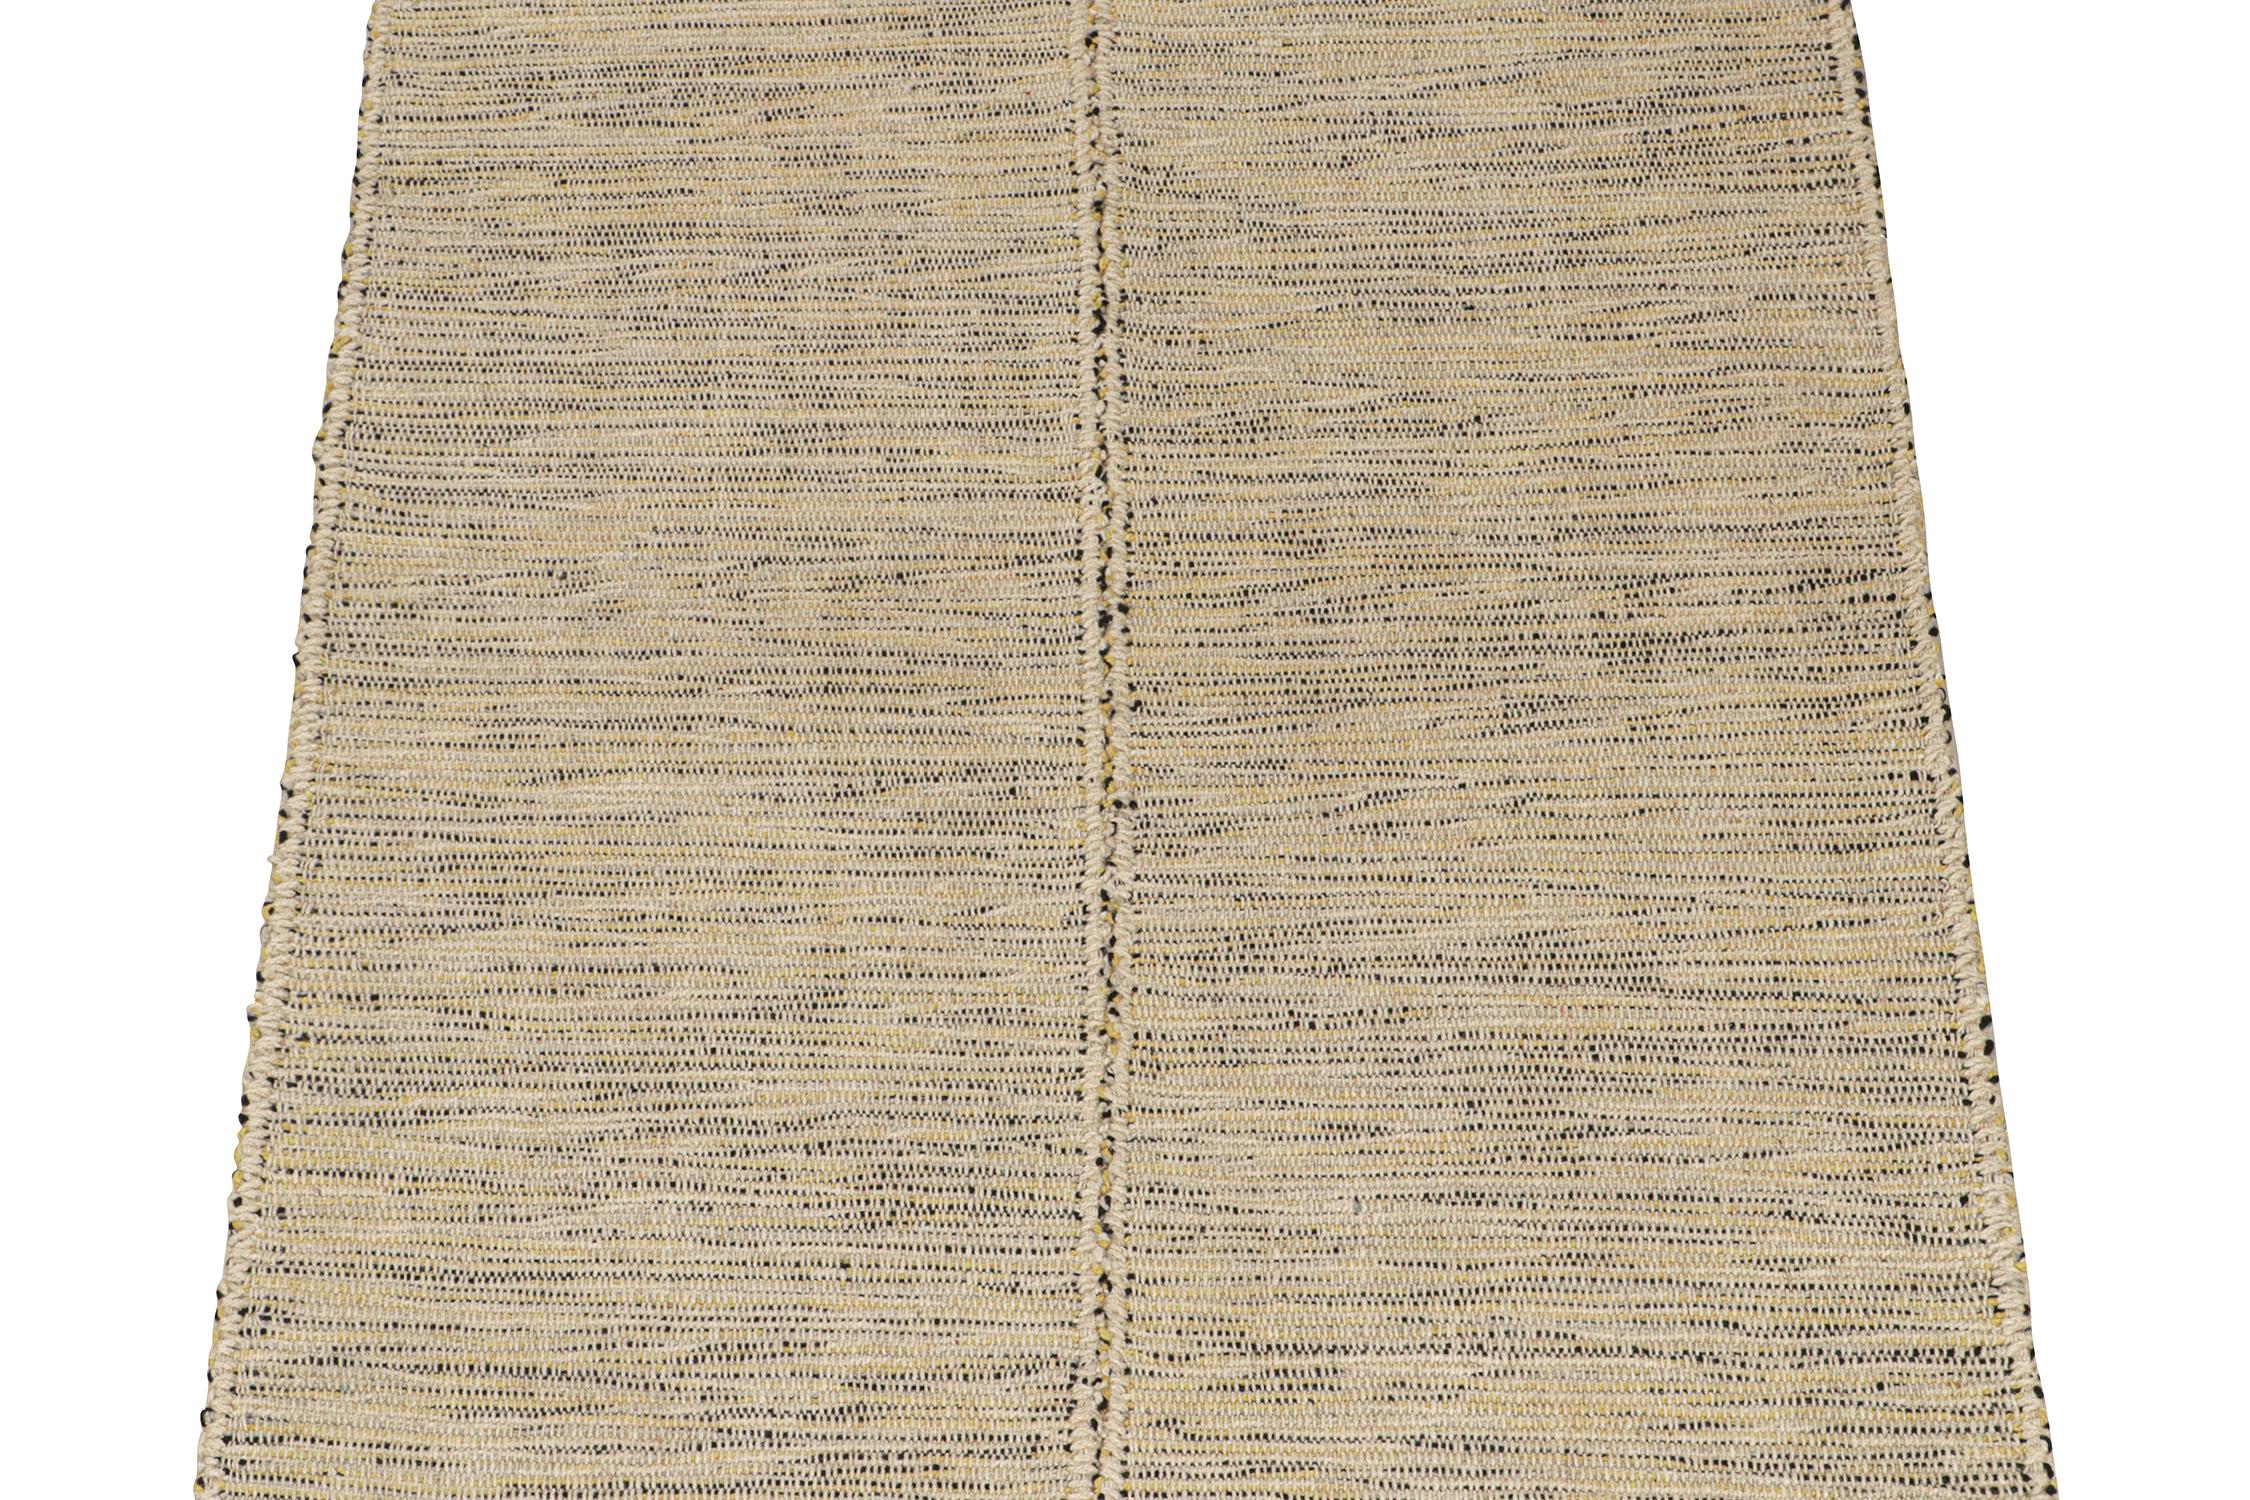 Handwoven in wool, this 4x5 Kilim is from a bold new line of contemporary flatweaves by Rug & Kilim.
Further on the Design:

The “Rez Kilim” connotes a modern take on classic panel weaving. This edition enjoys comfortable tones of beige with